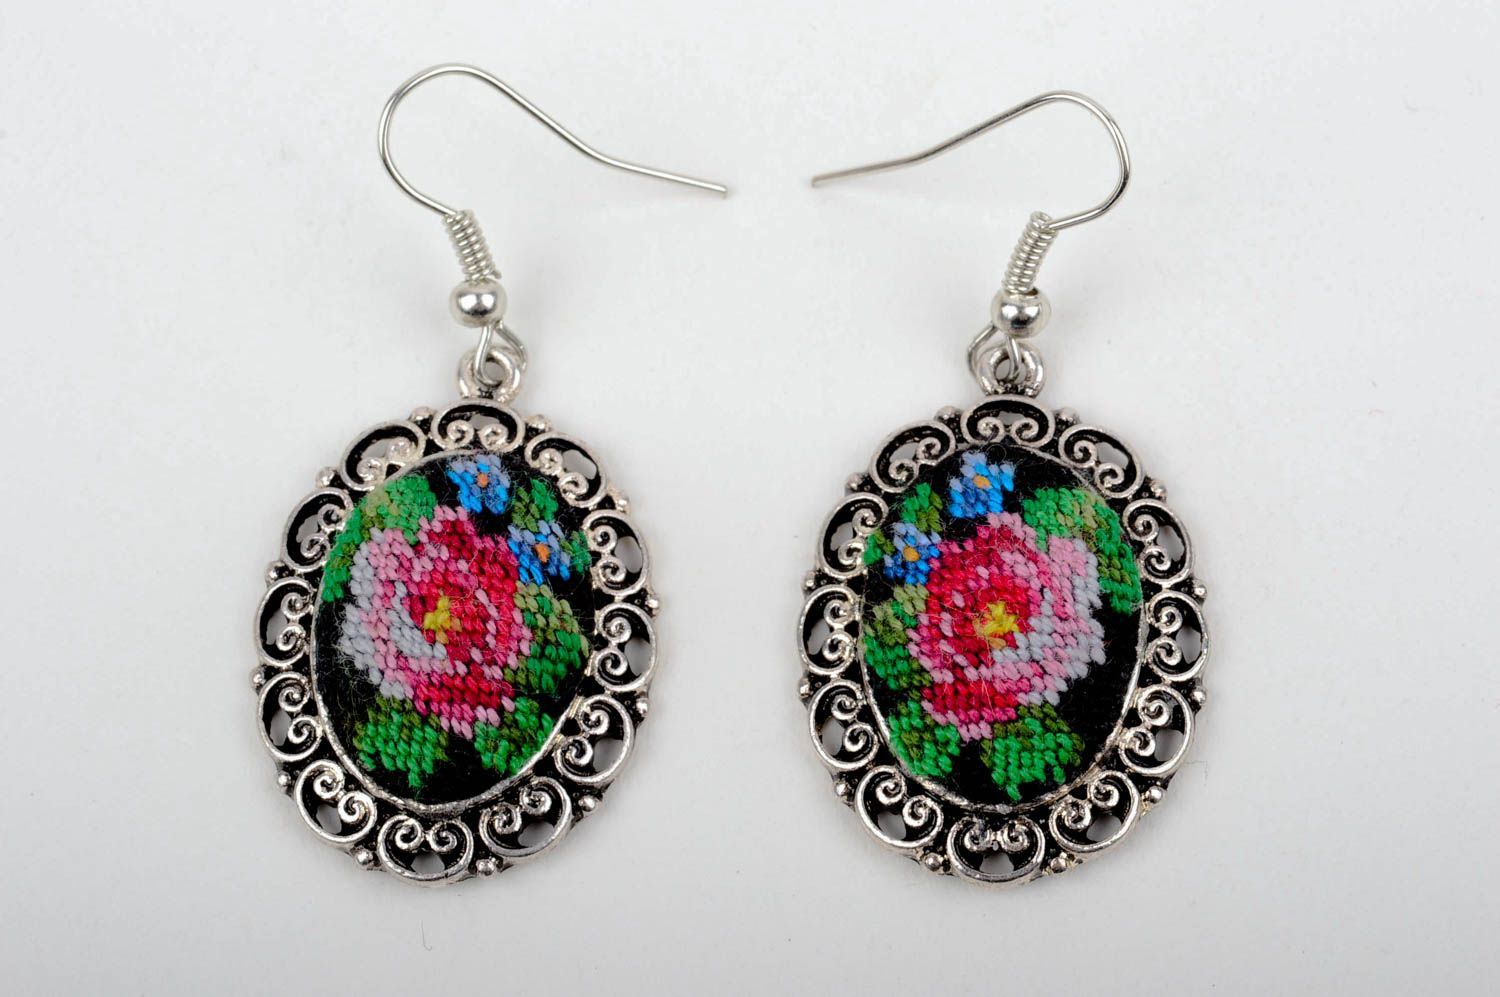 Handmade metal earrings embroidered earrings cross stitch ideas gifts for her photo 2